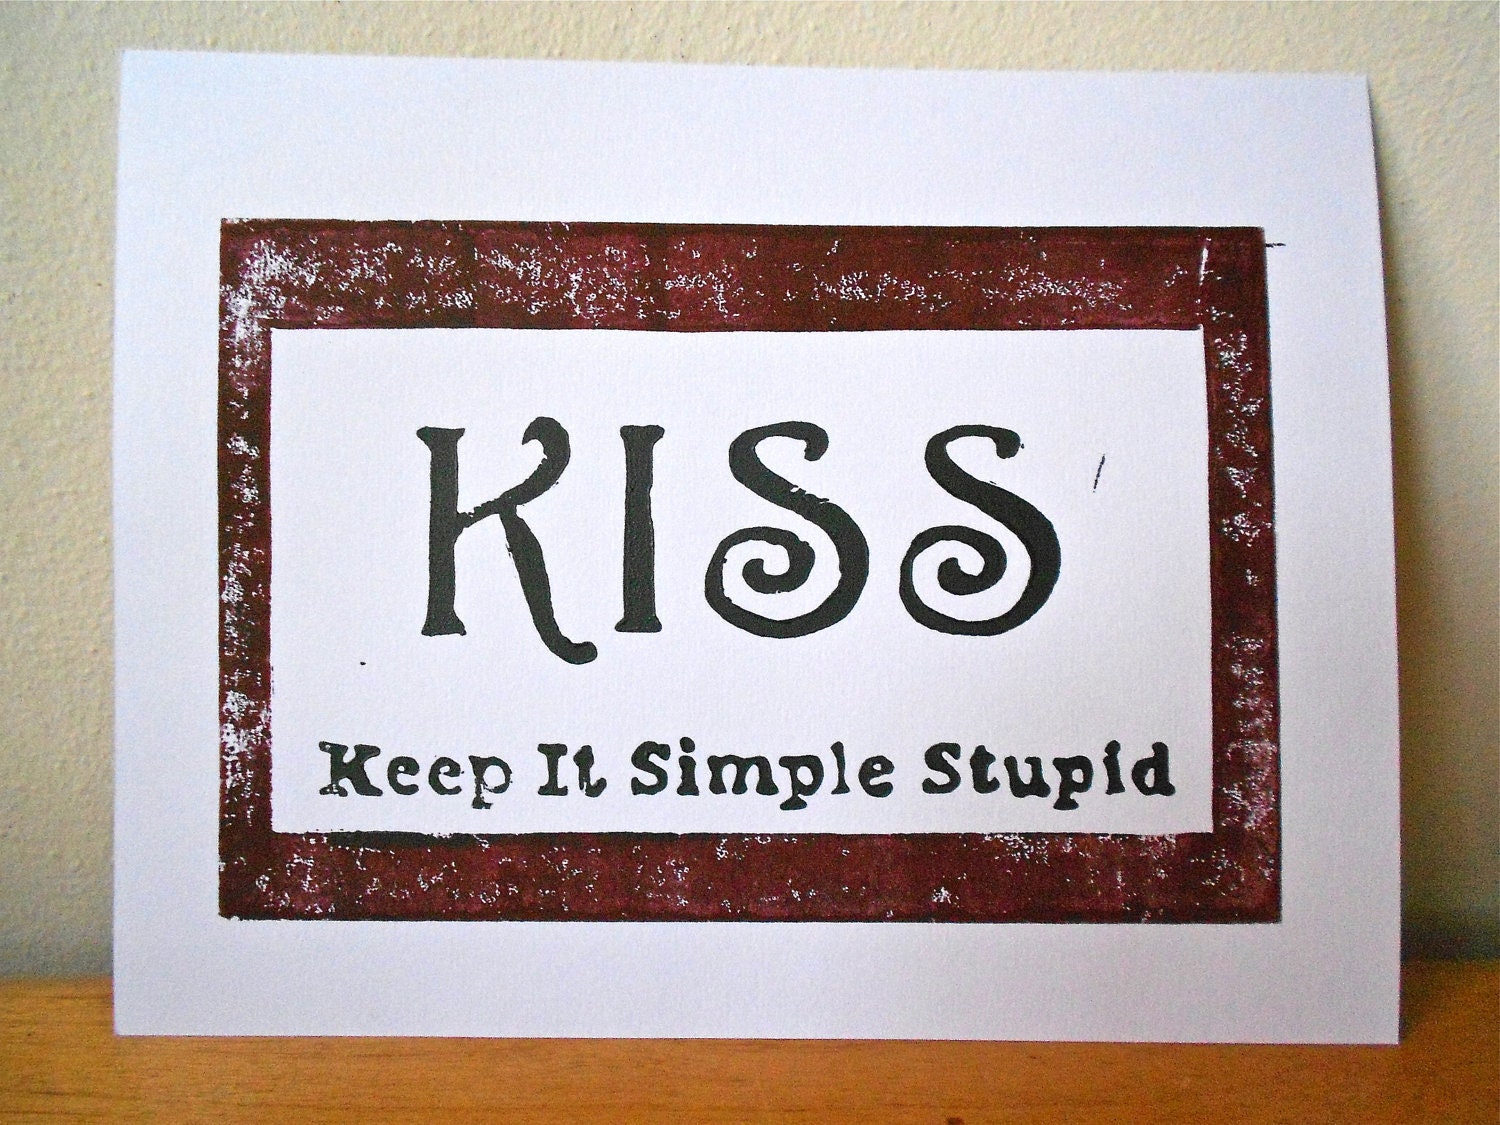 keep it simple silly